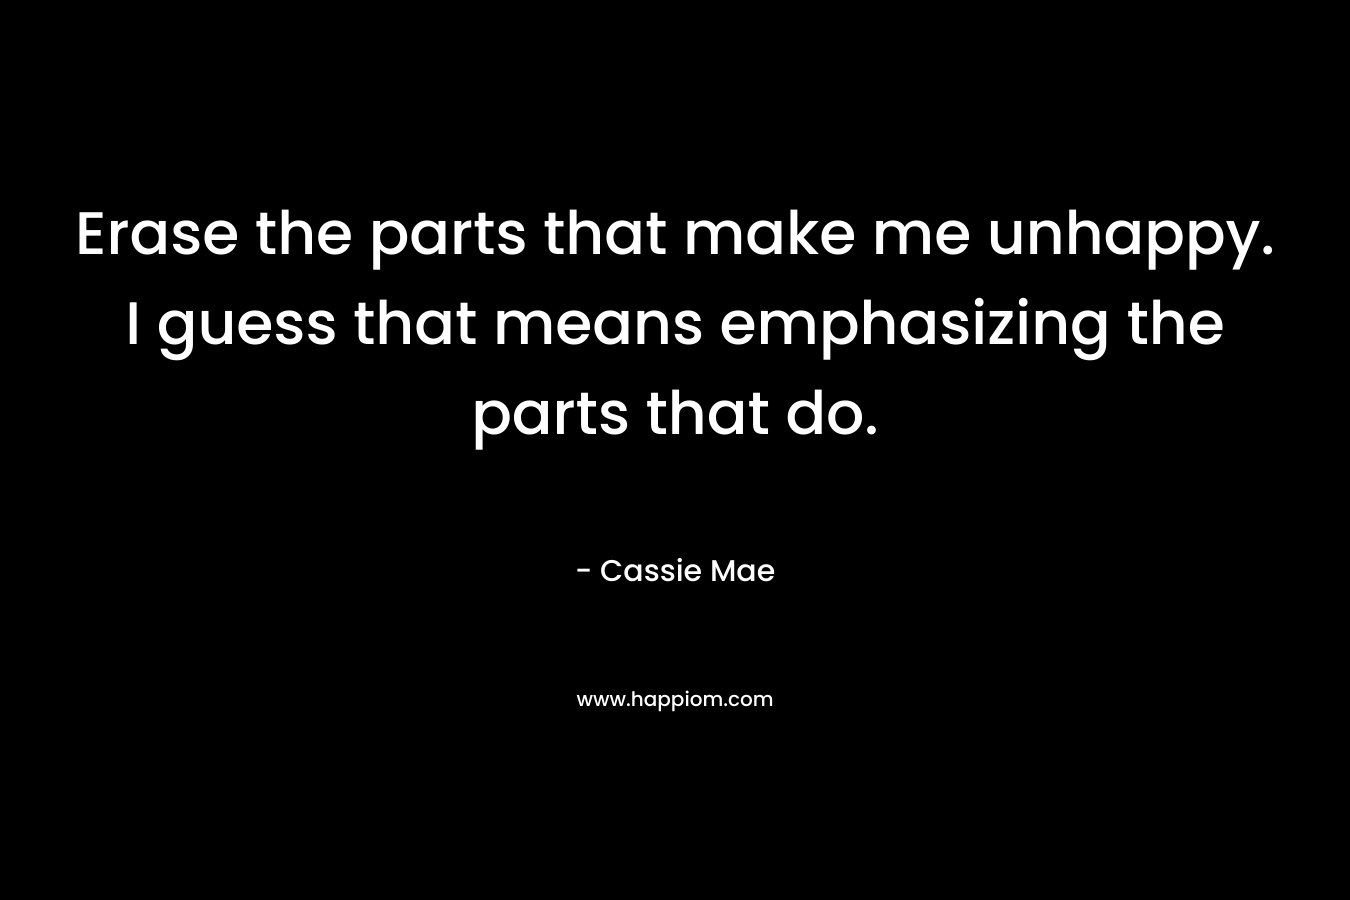 Erase the parts that make me unhappy. I guess that means emphasizing the parts that do.